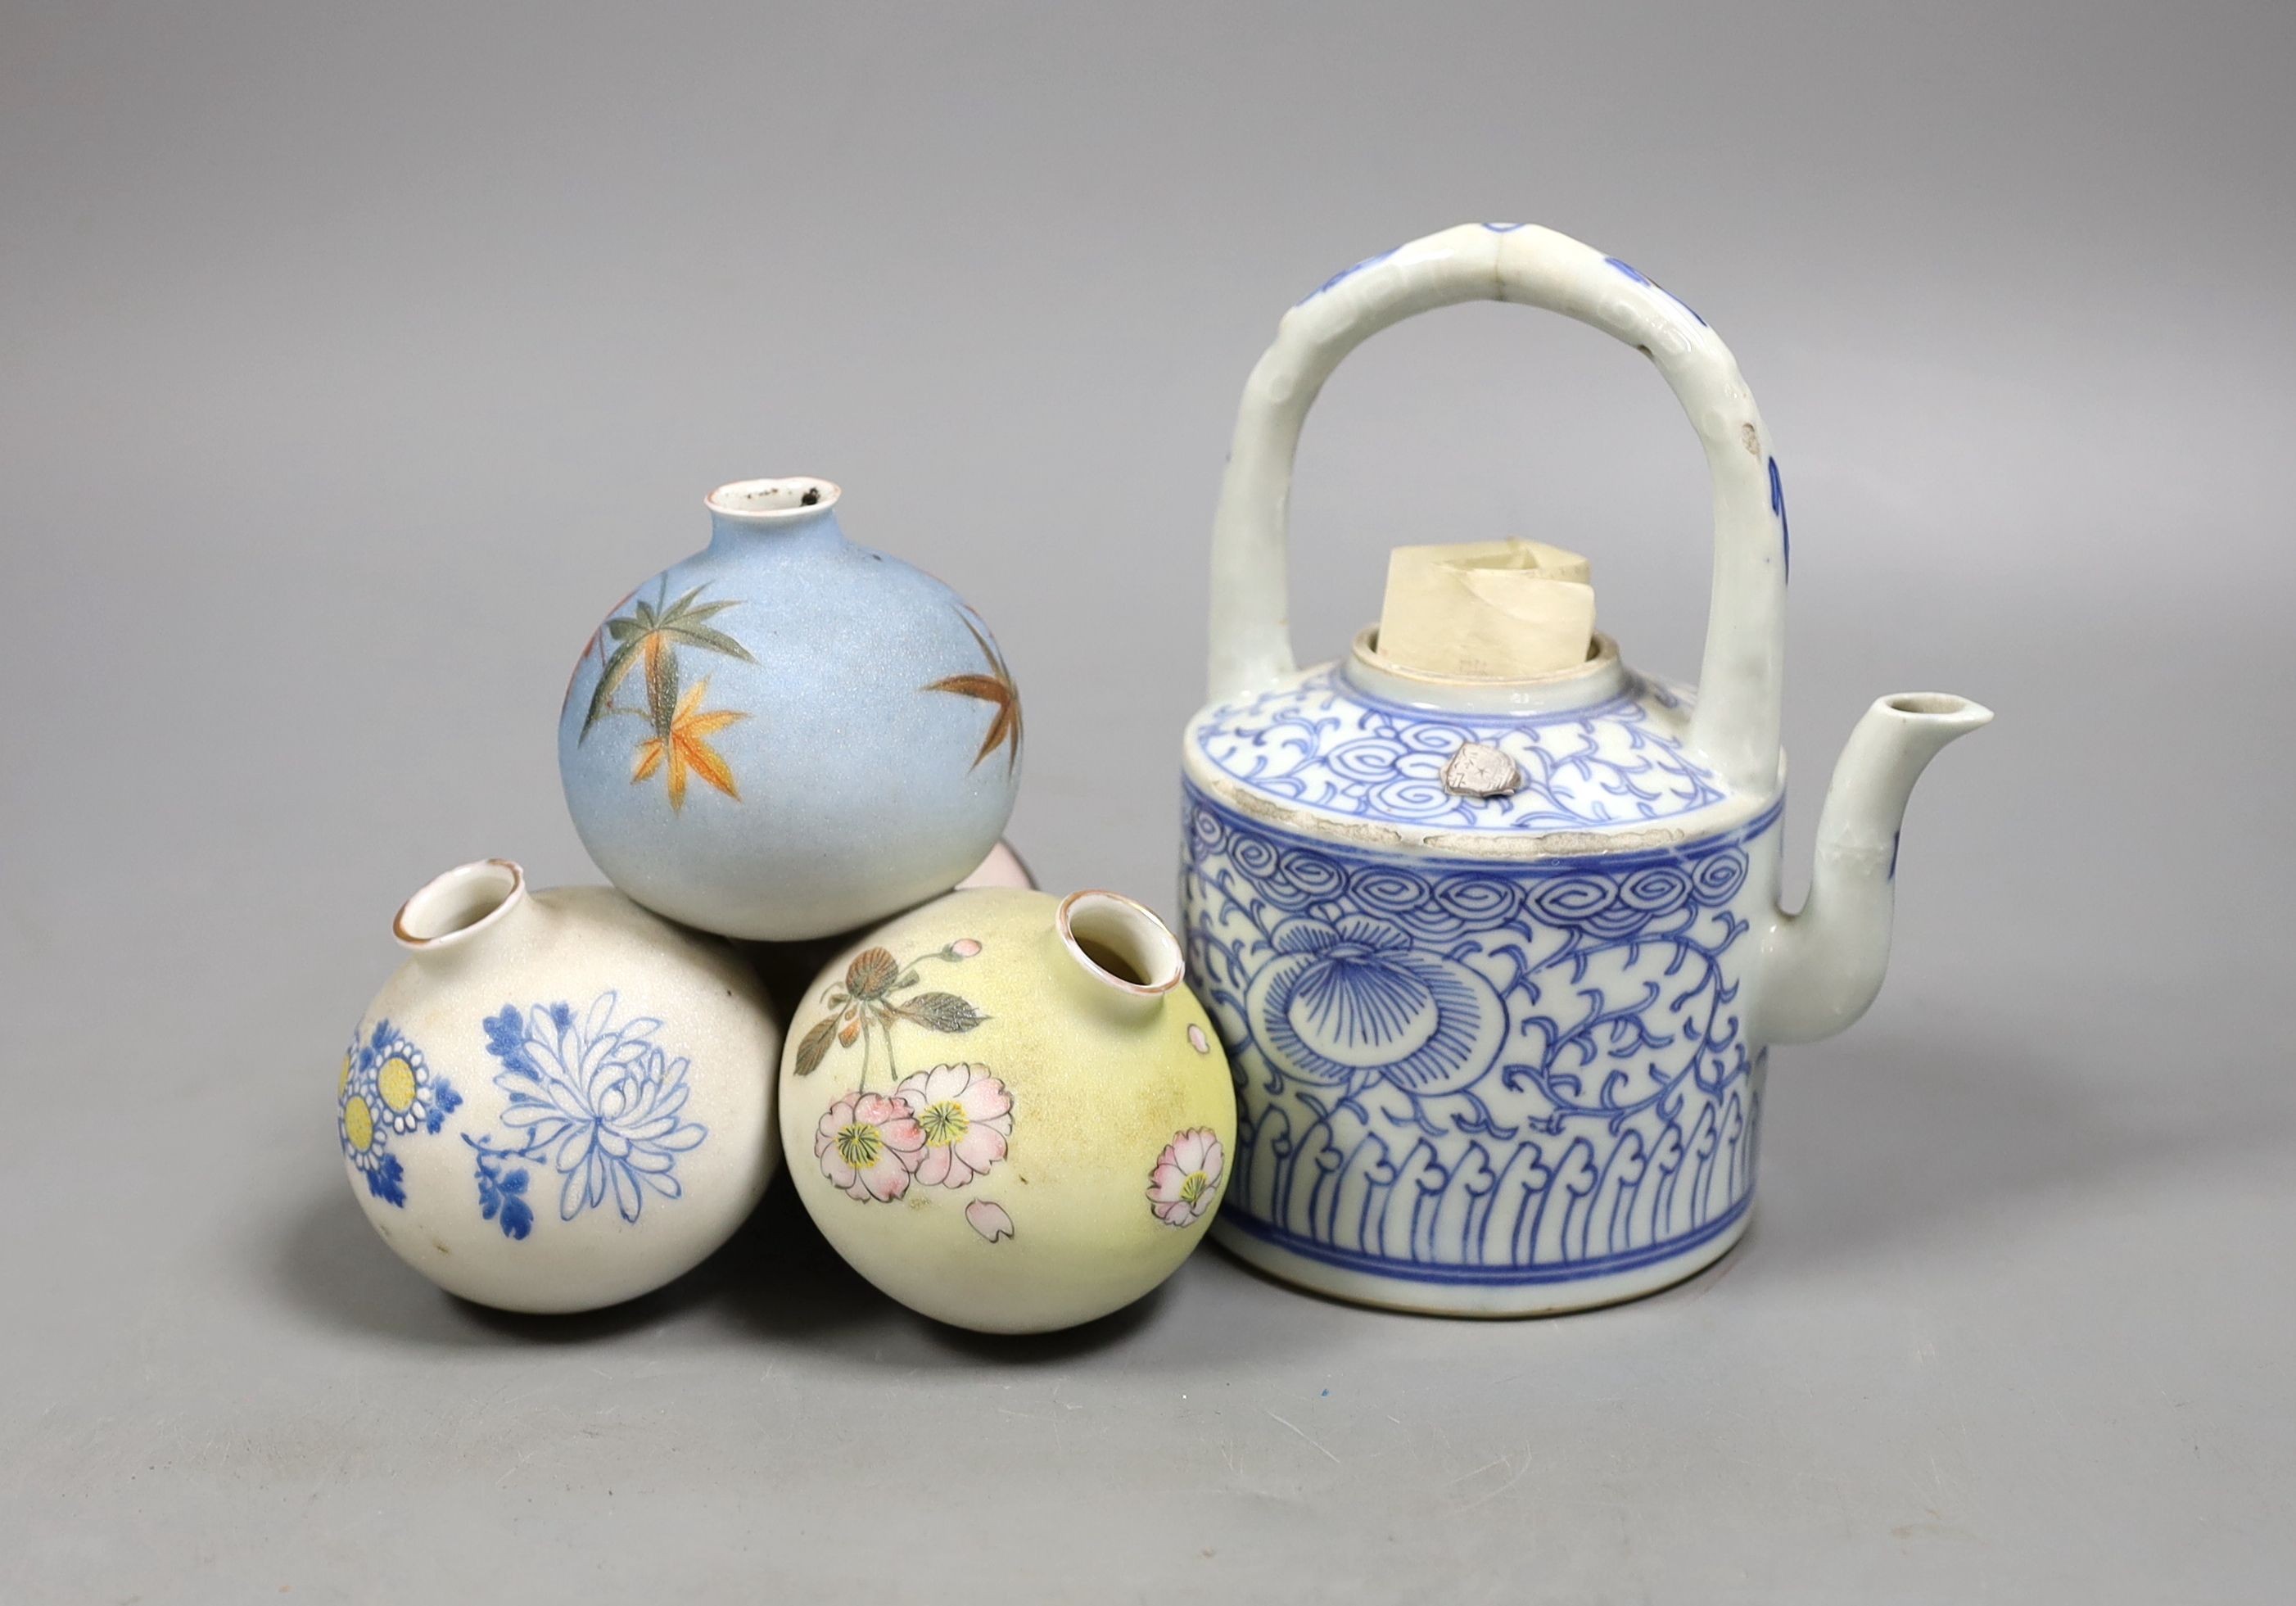 A Chinese blue and white teapot - no cover and a Japanese multiple globular posy vase, Teapot 15 cms high including handle.